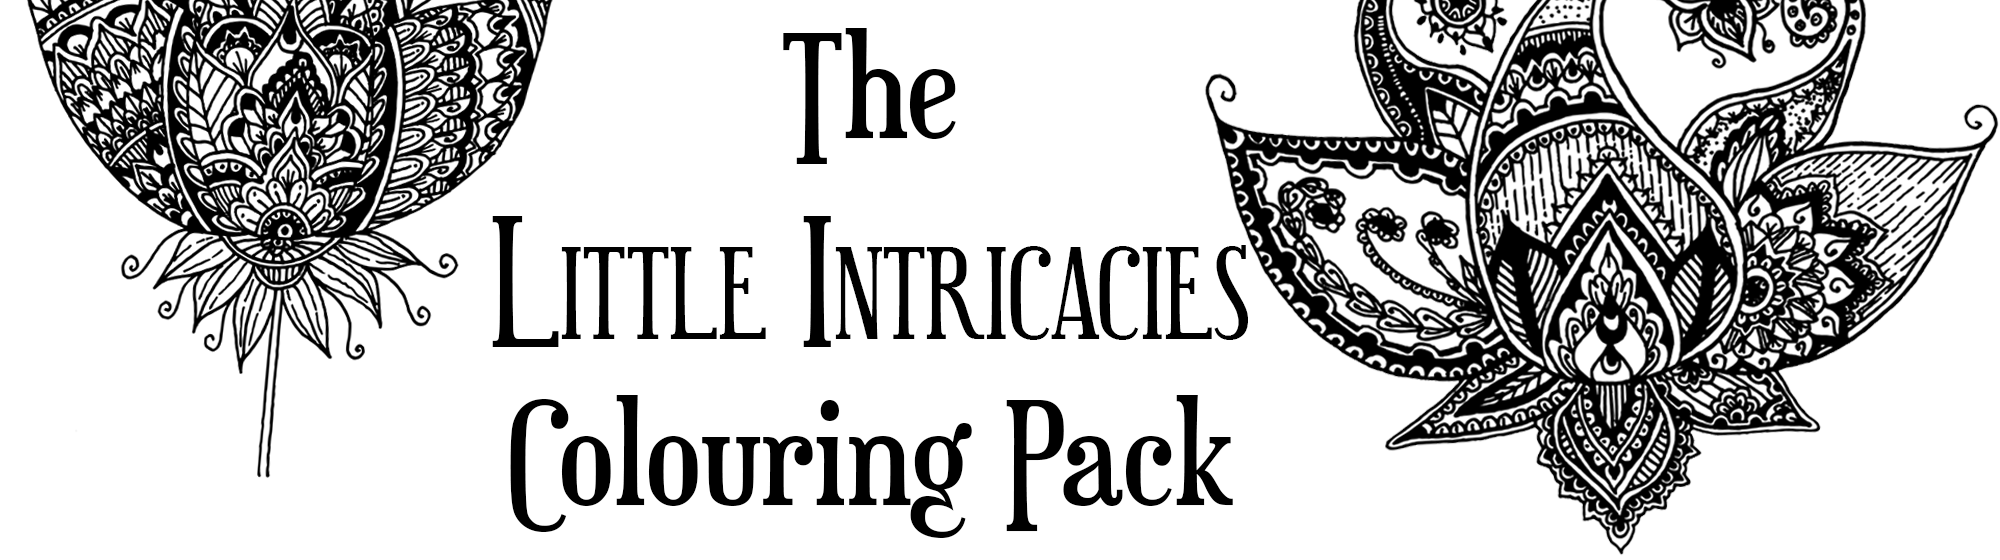 The Little Intricacies Colouring Pack